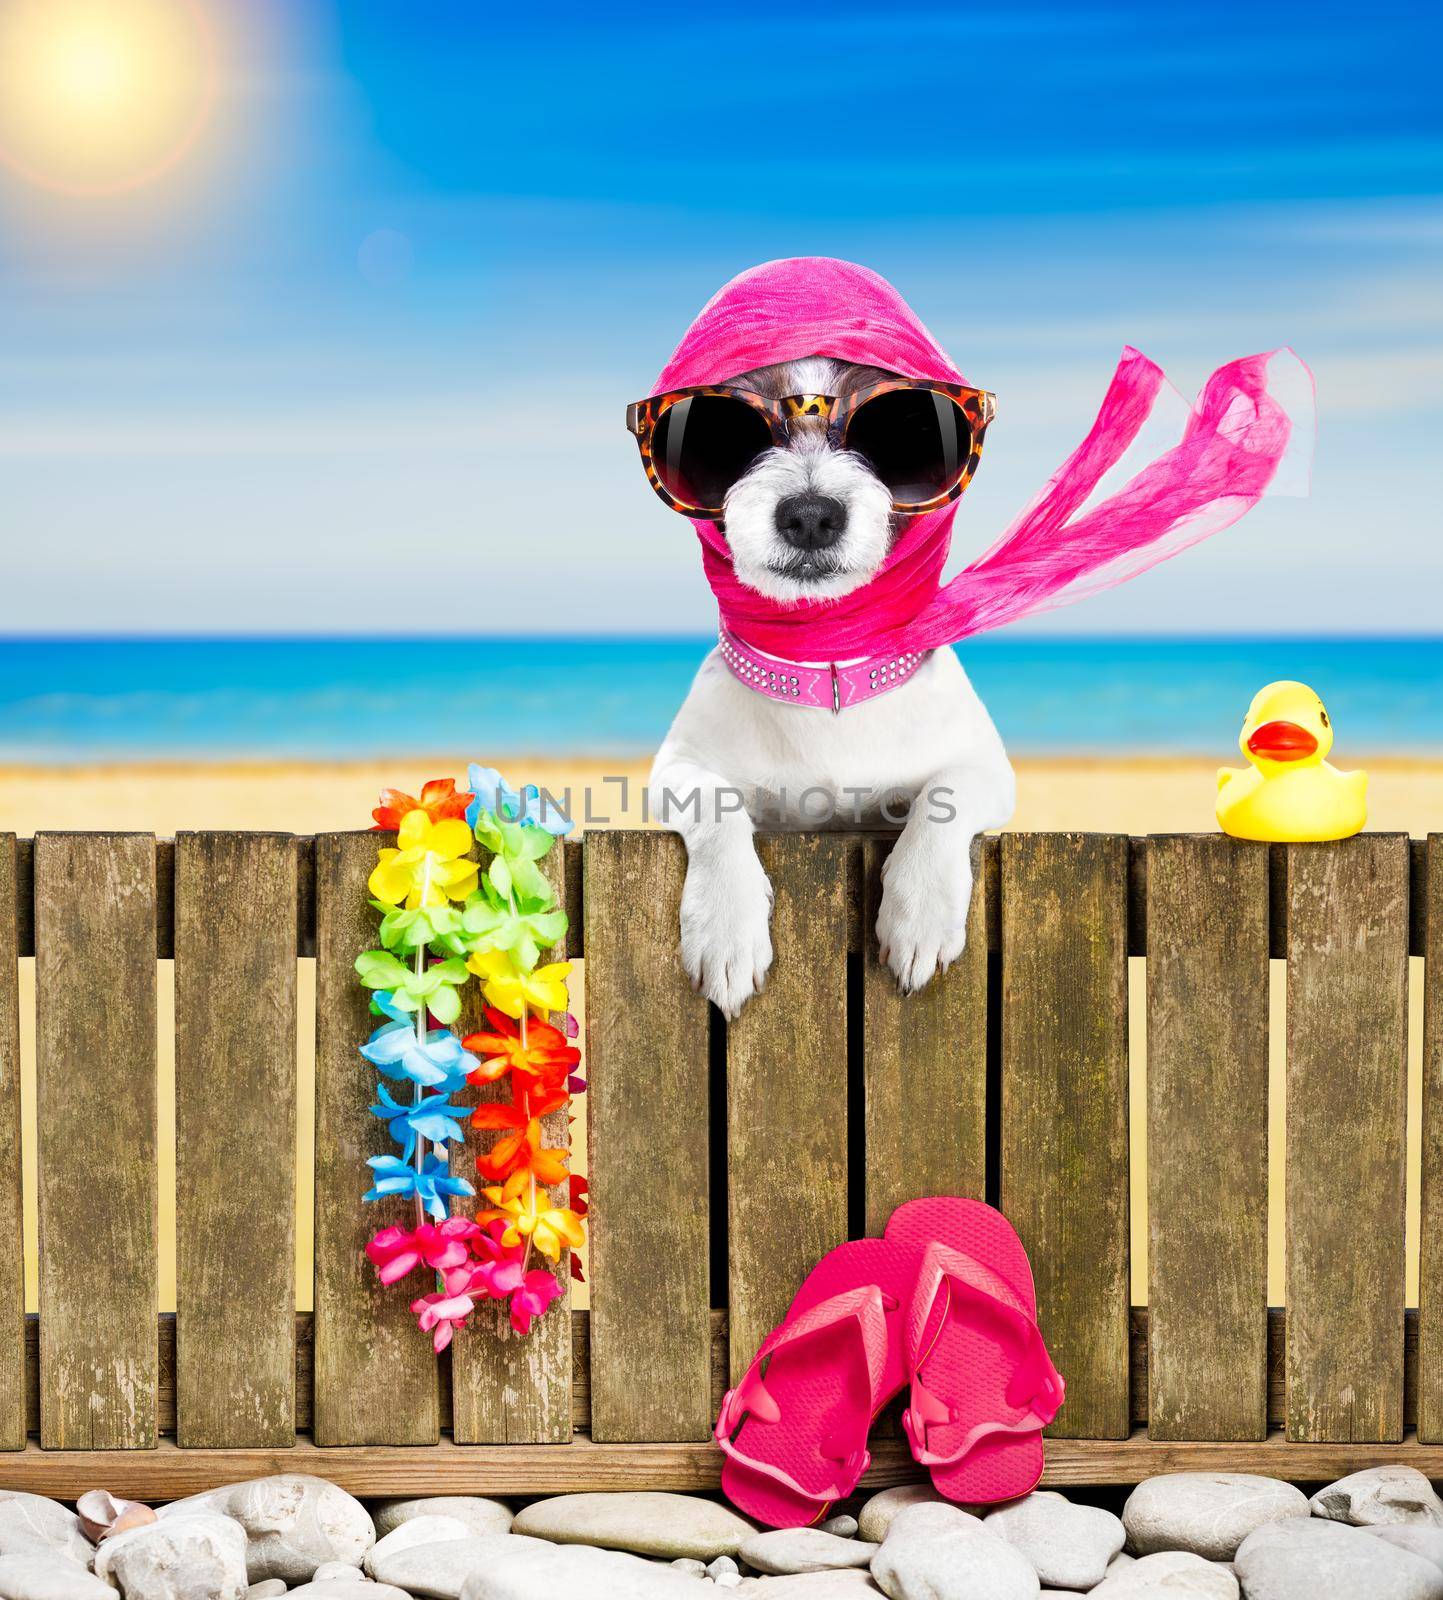 terrier dog resting and relaxing on a wall or fence at the  beach  ocean shore, on summer vacation holidays, wearing sunglasses